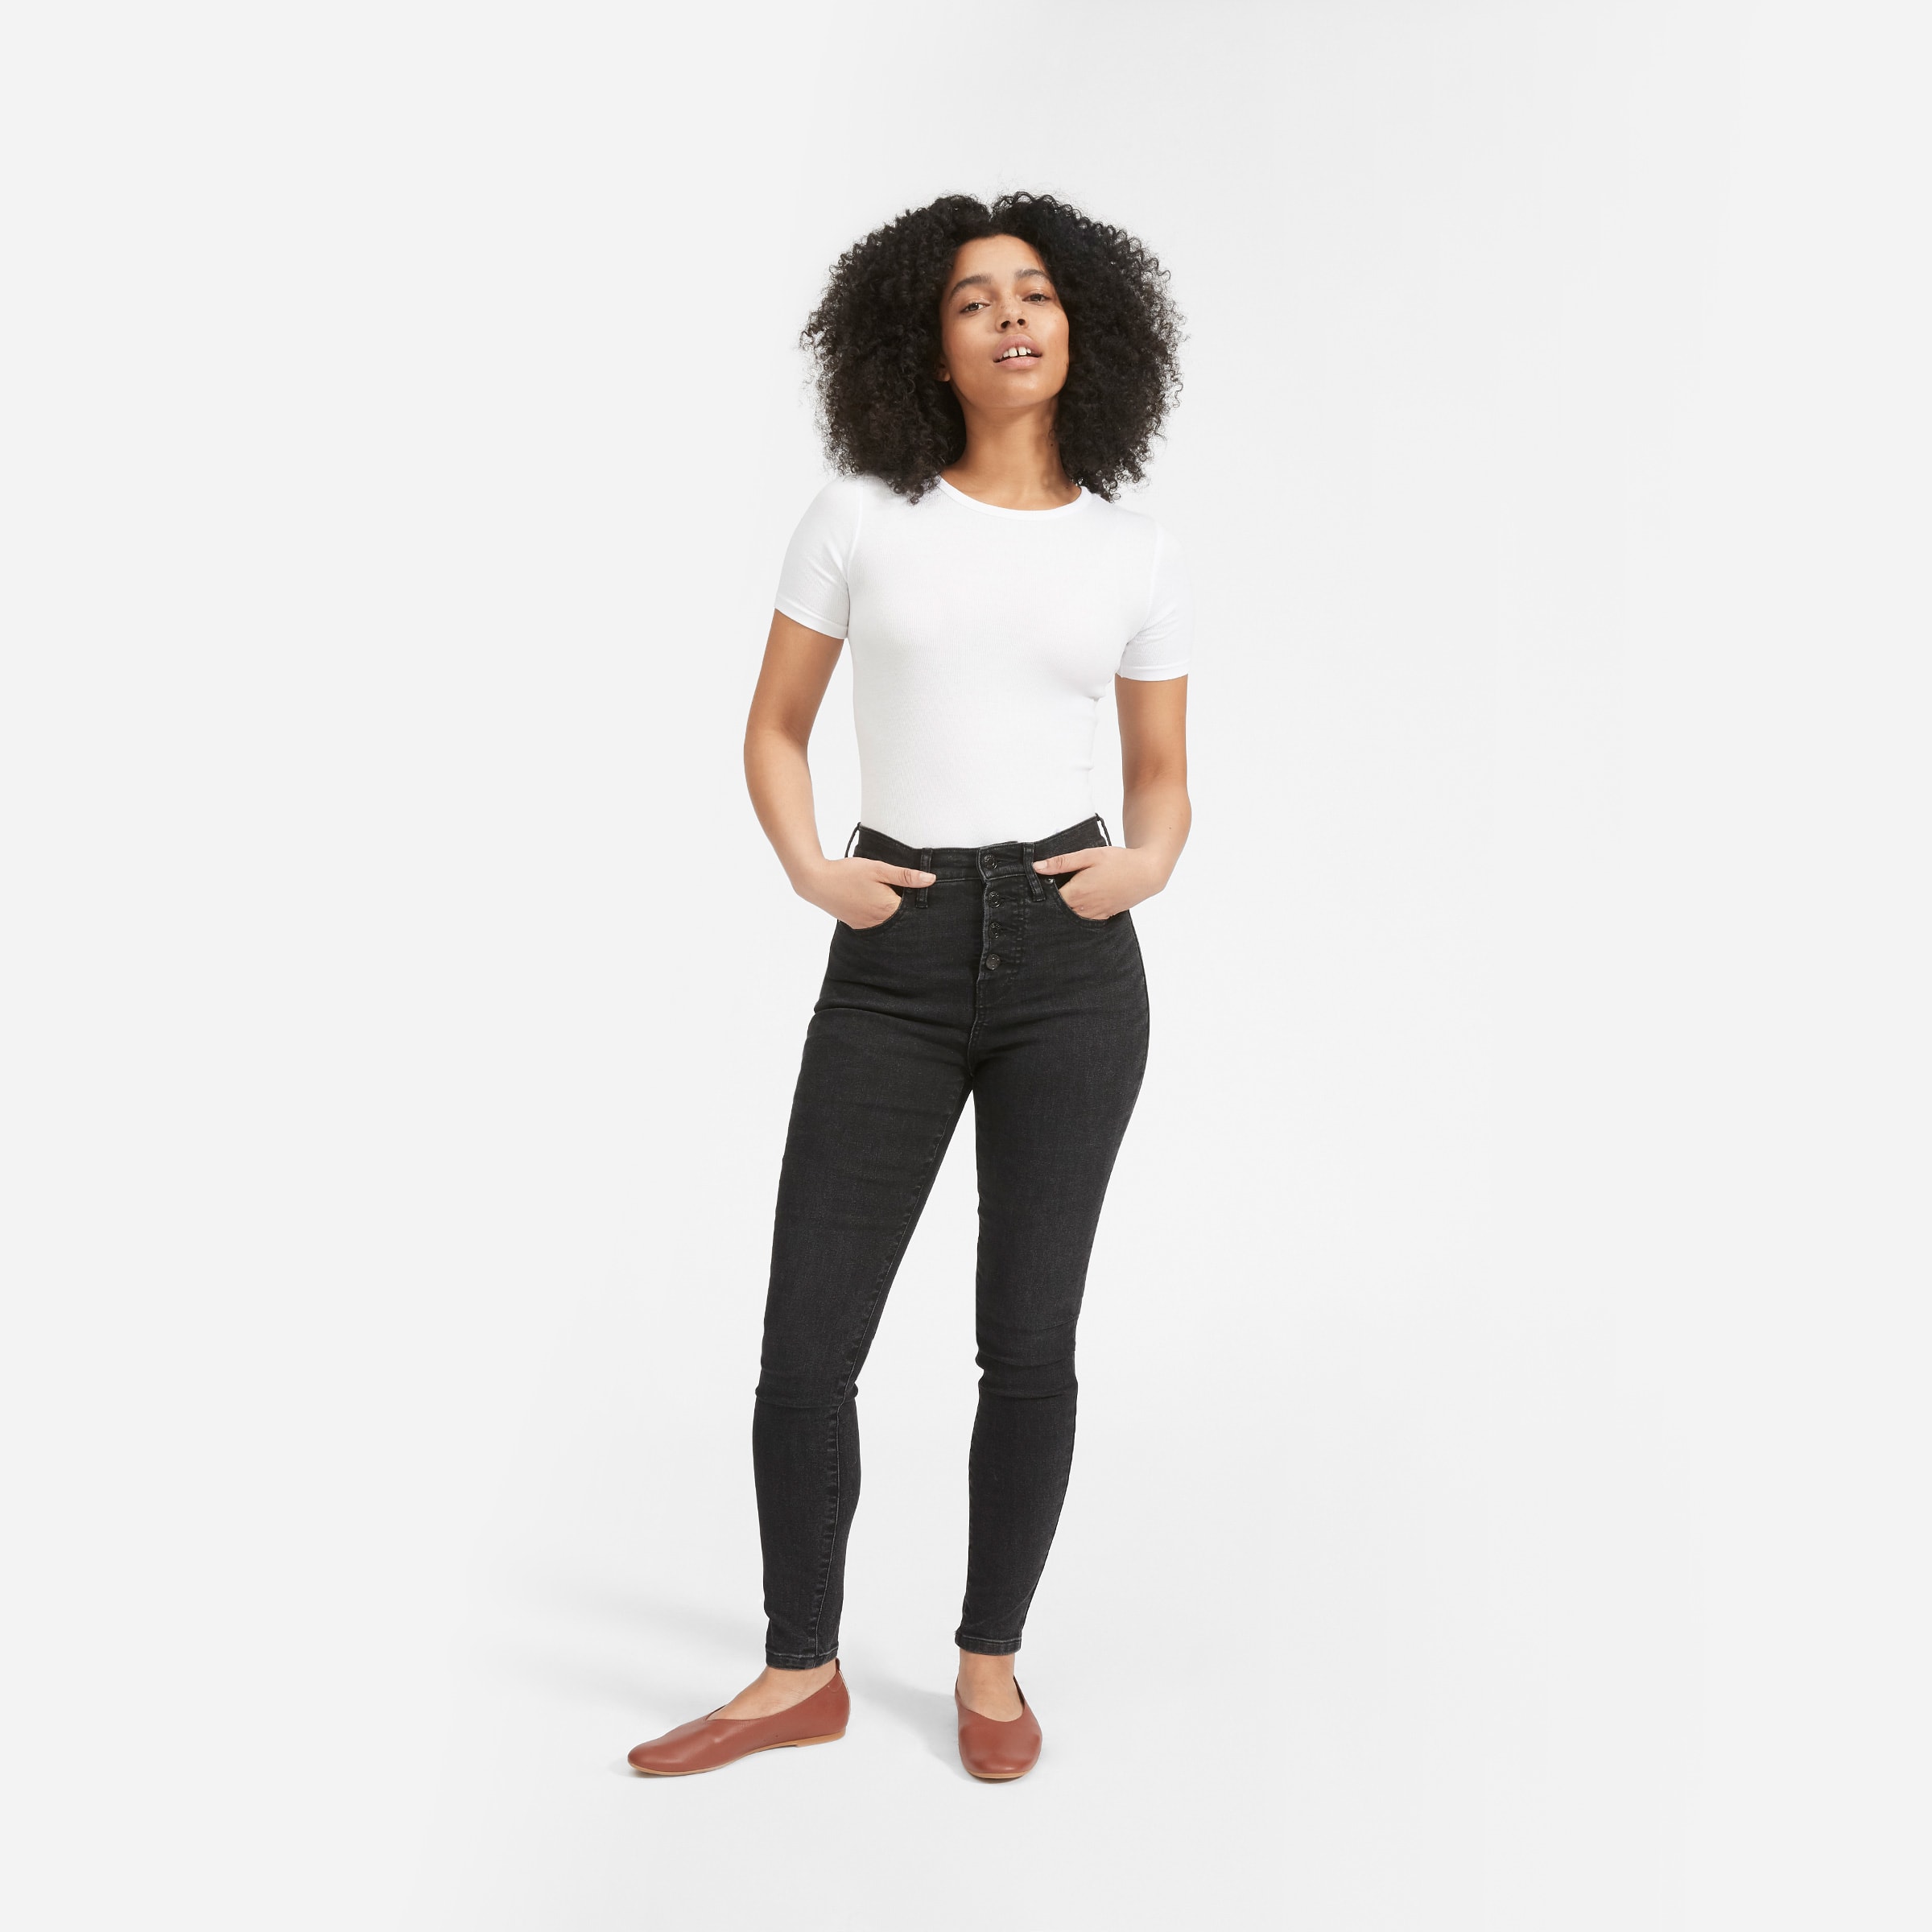 black button fly skinny jeans